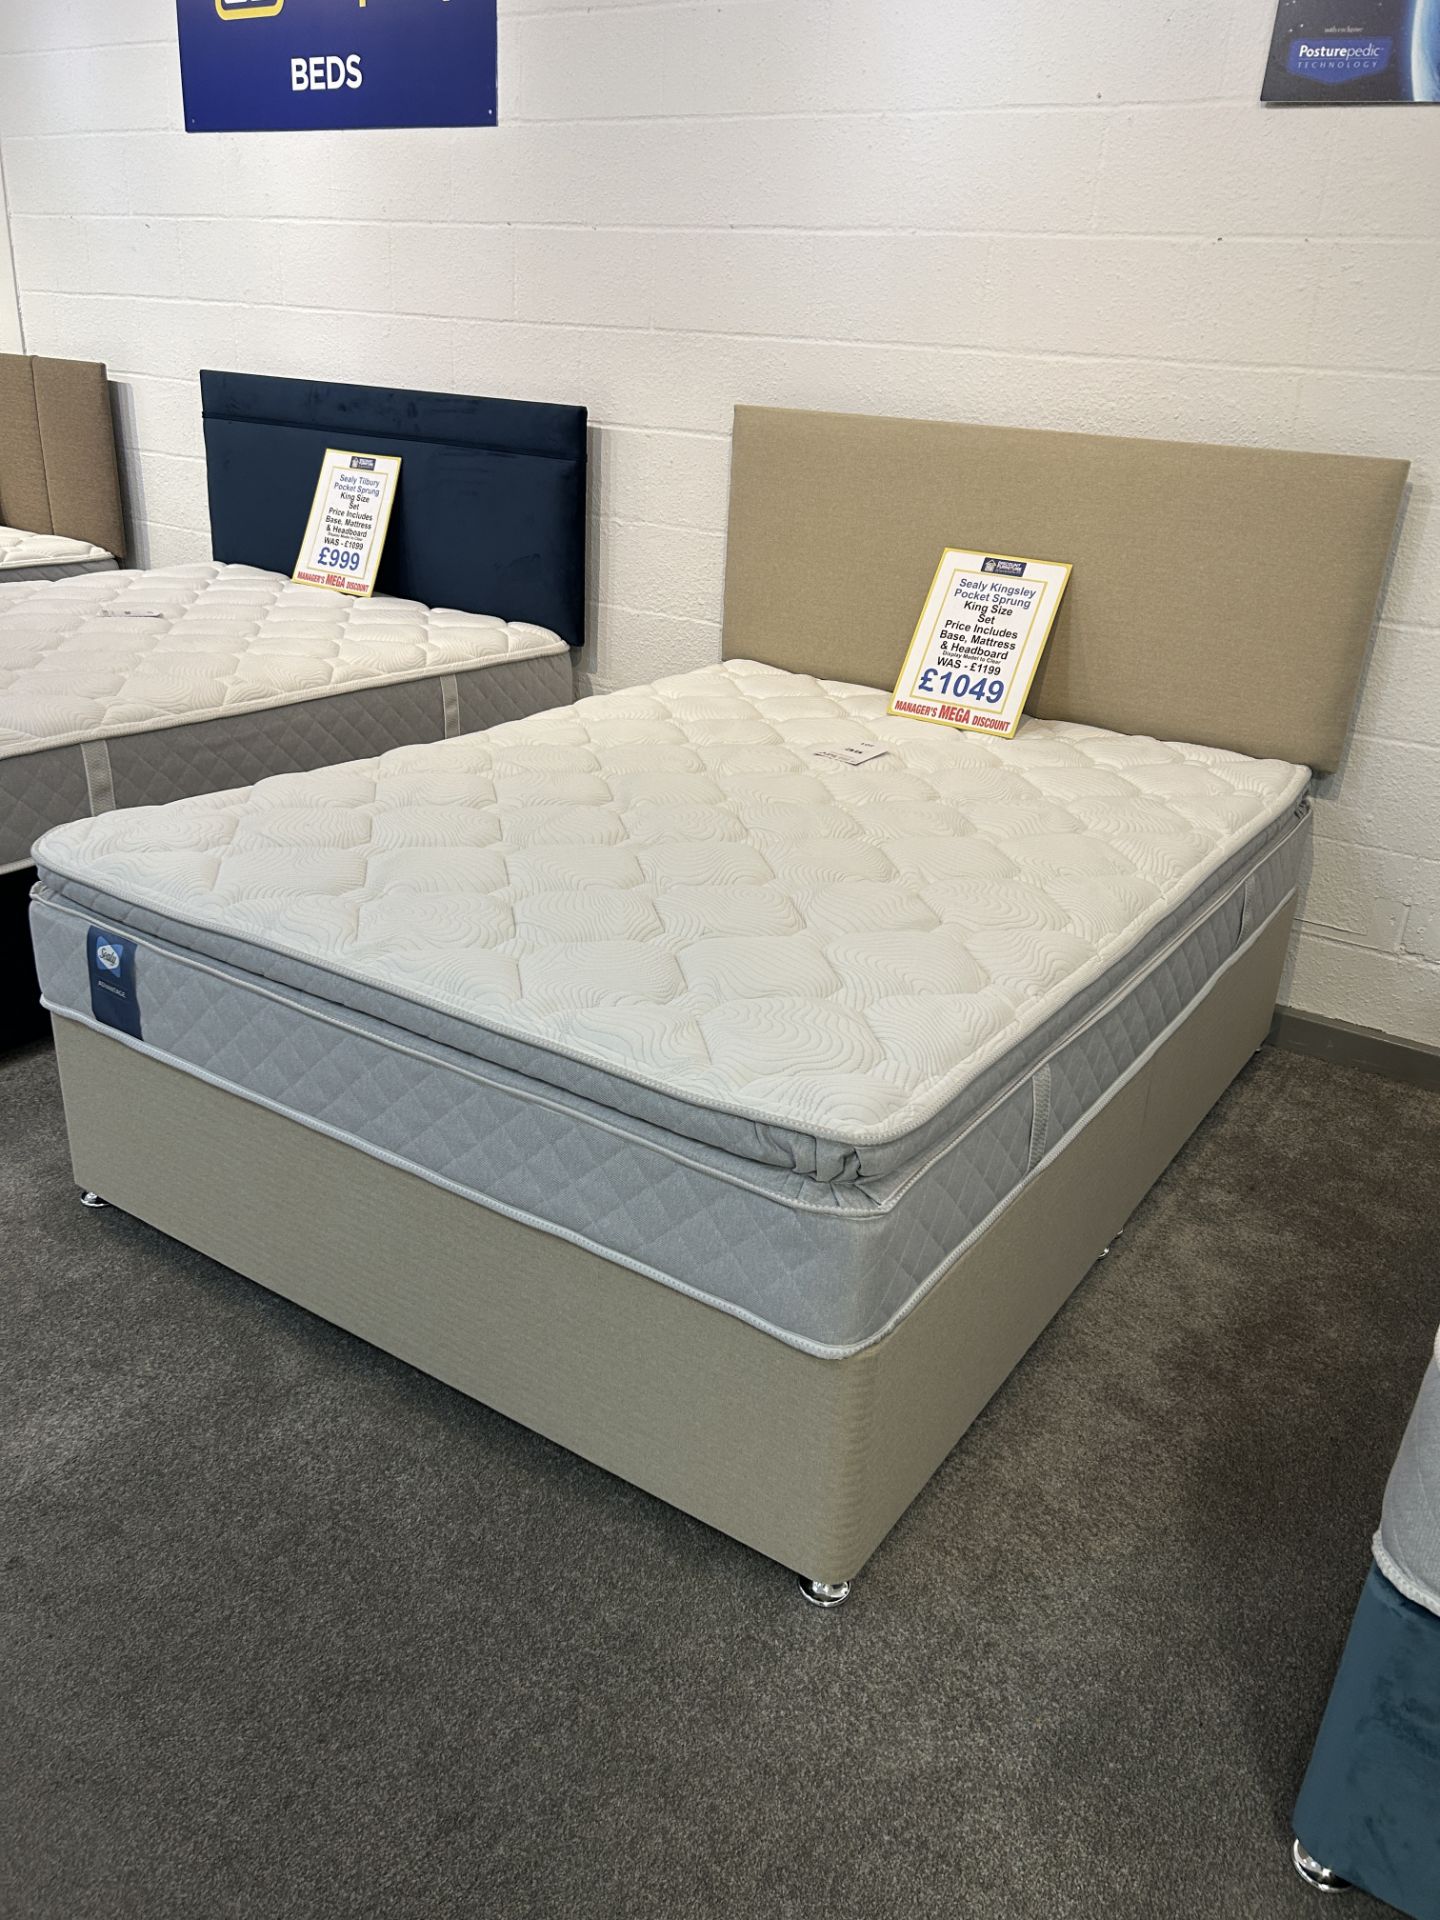 Ex-Display King Size Bed Set incl: Sealy Kingsley Mattress, Base & Headboard | RRP £1,199 - Image 3 of 3